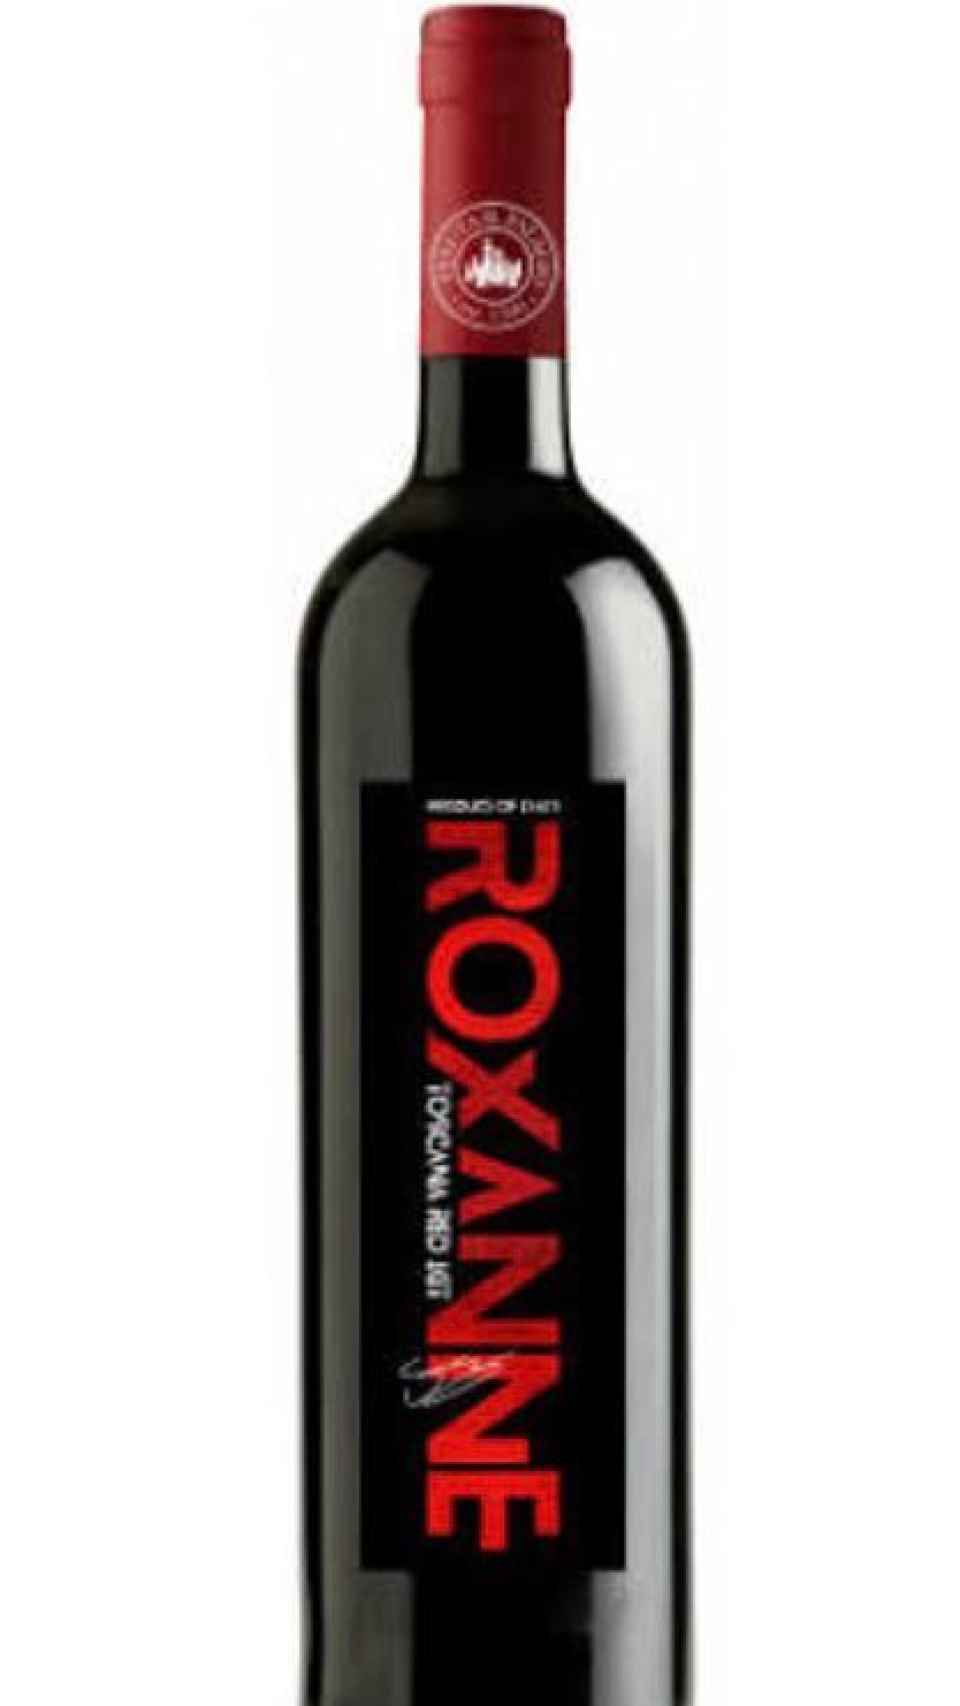 Roxanne, a song or a wine?